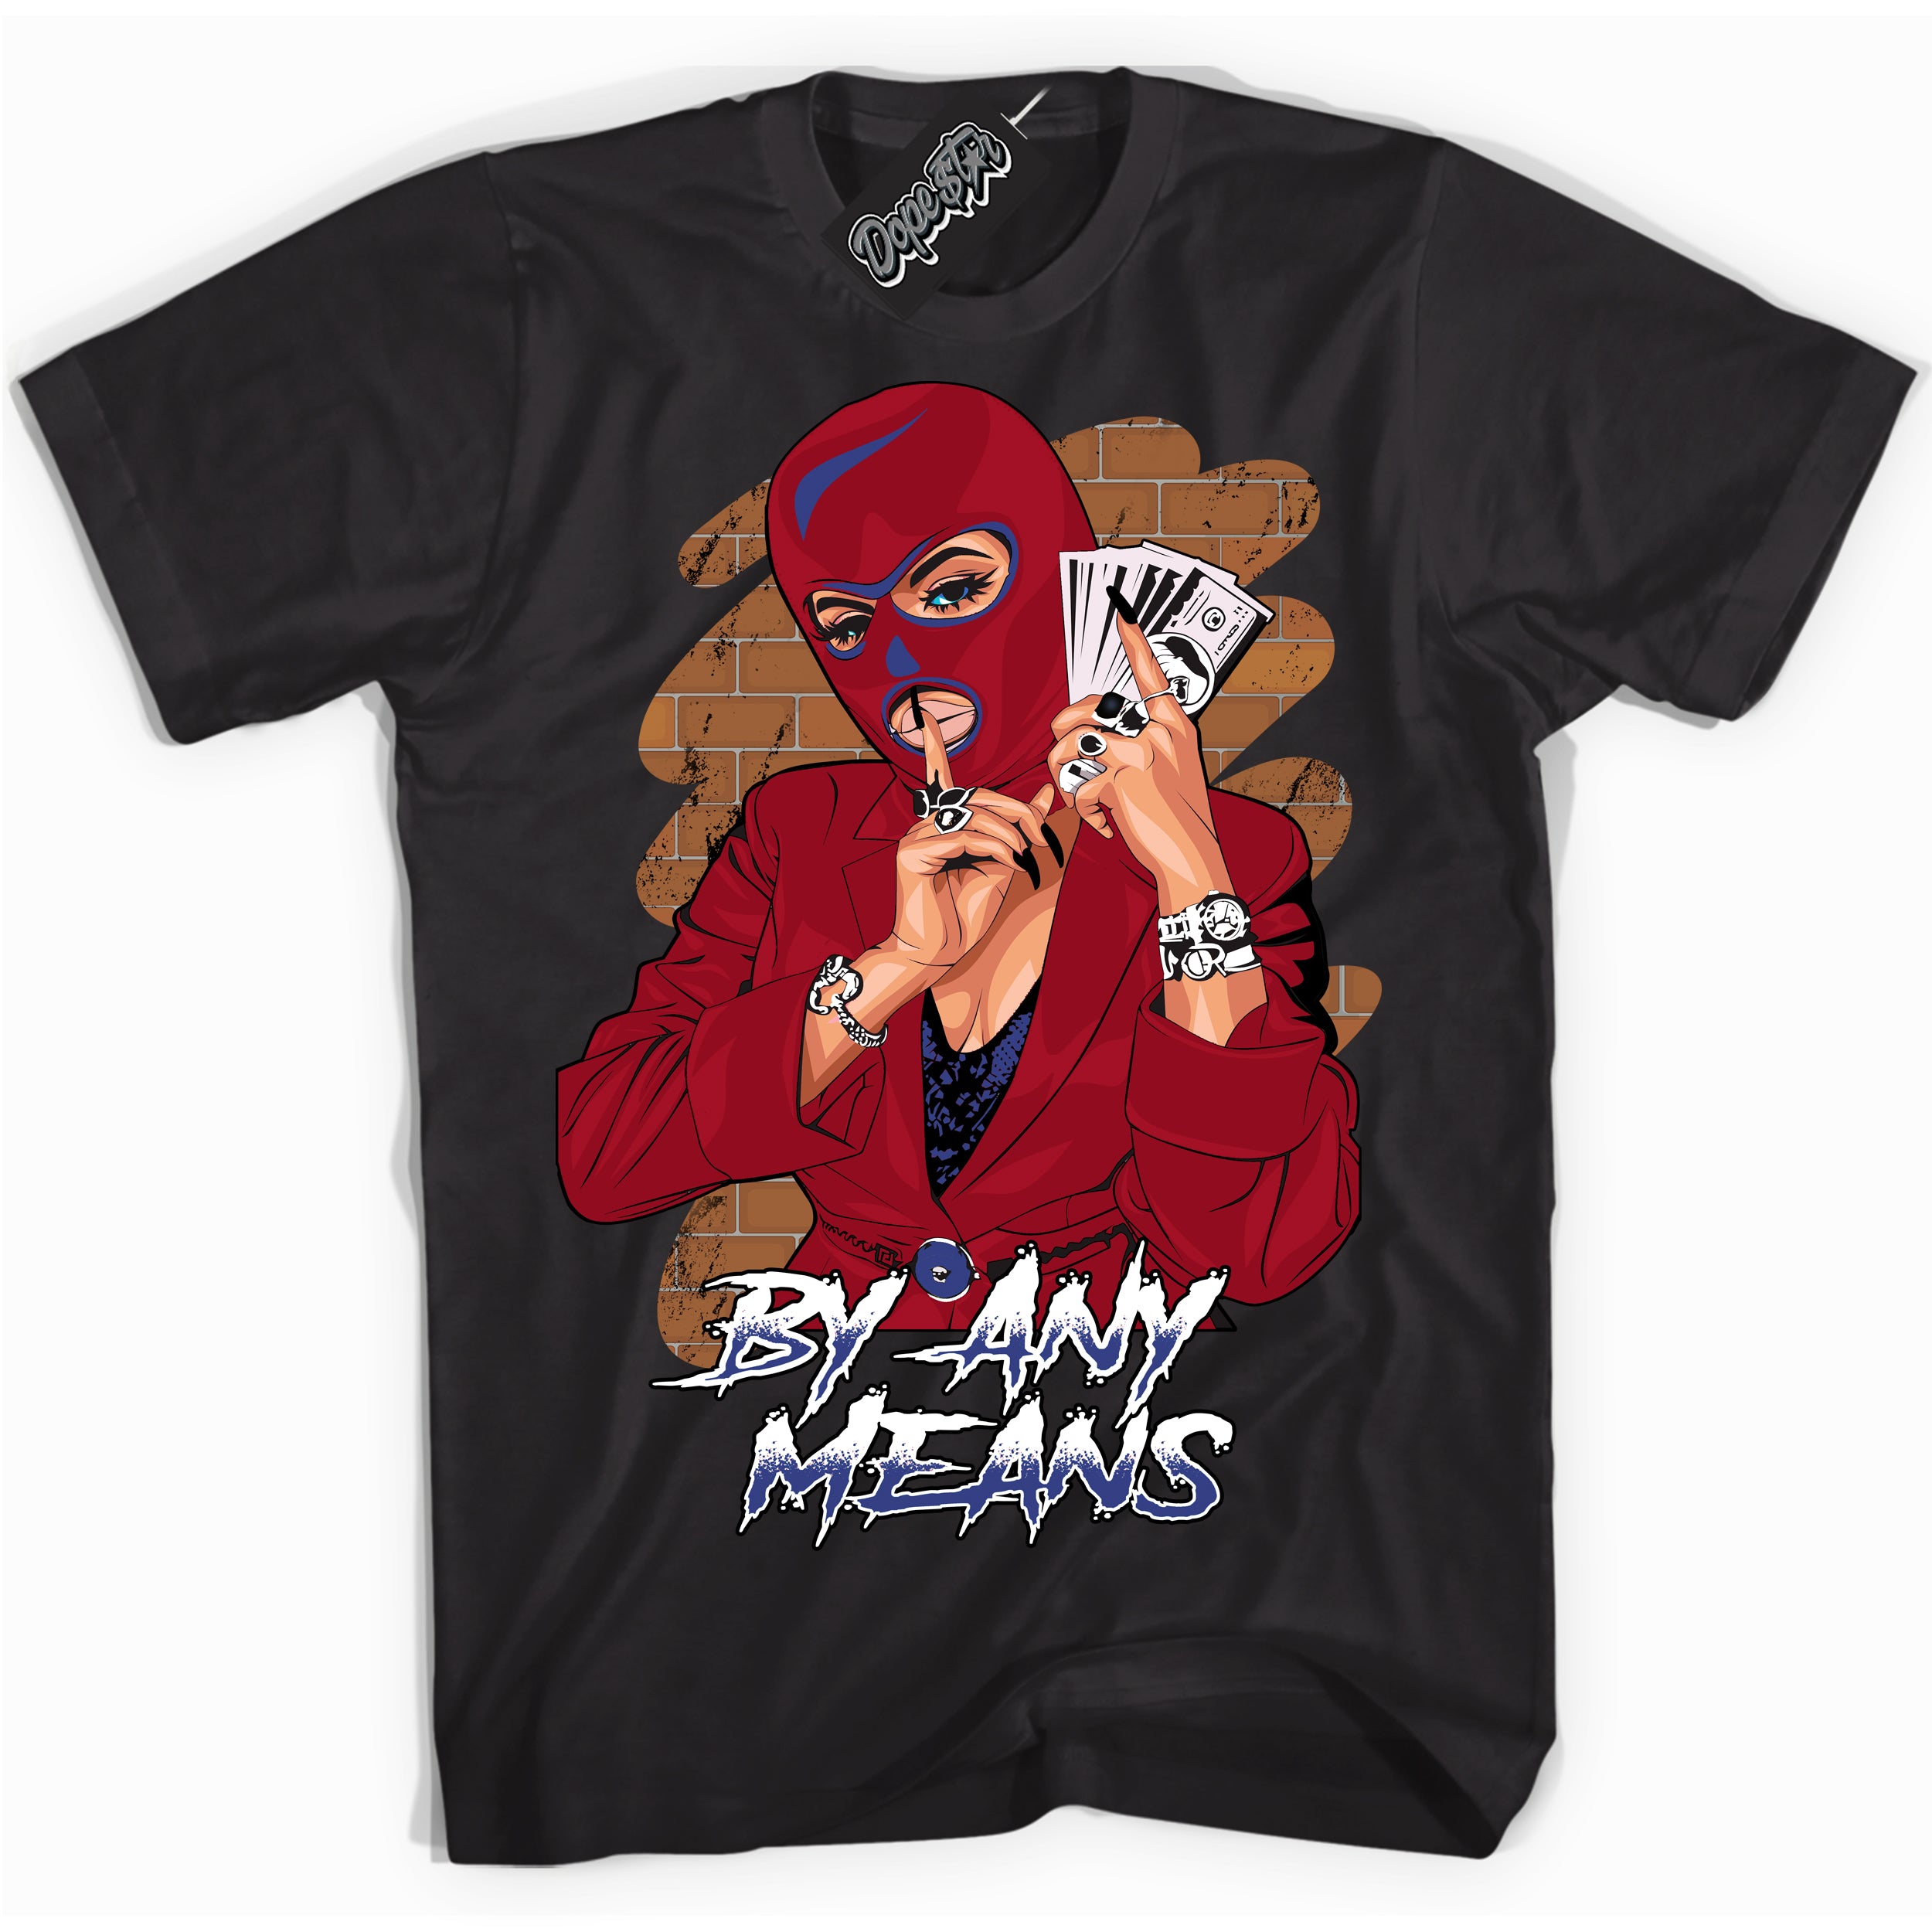 Cool Black Shirt with “ By Any Means ” design that perfectly matches Playoffs 8s Sneakers.